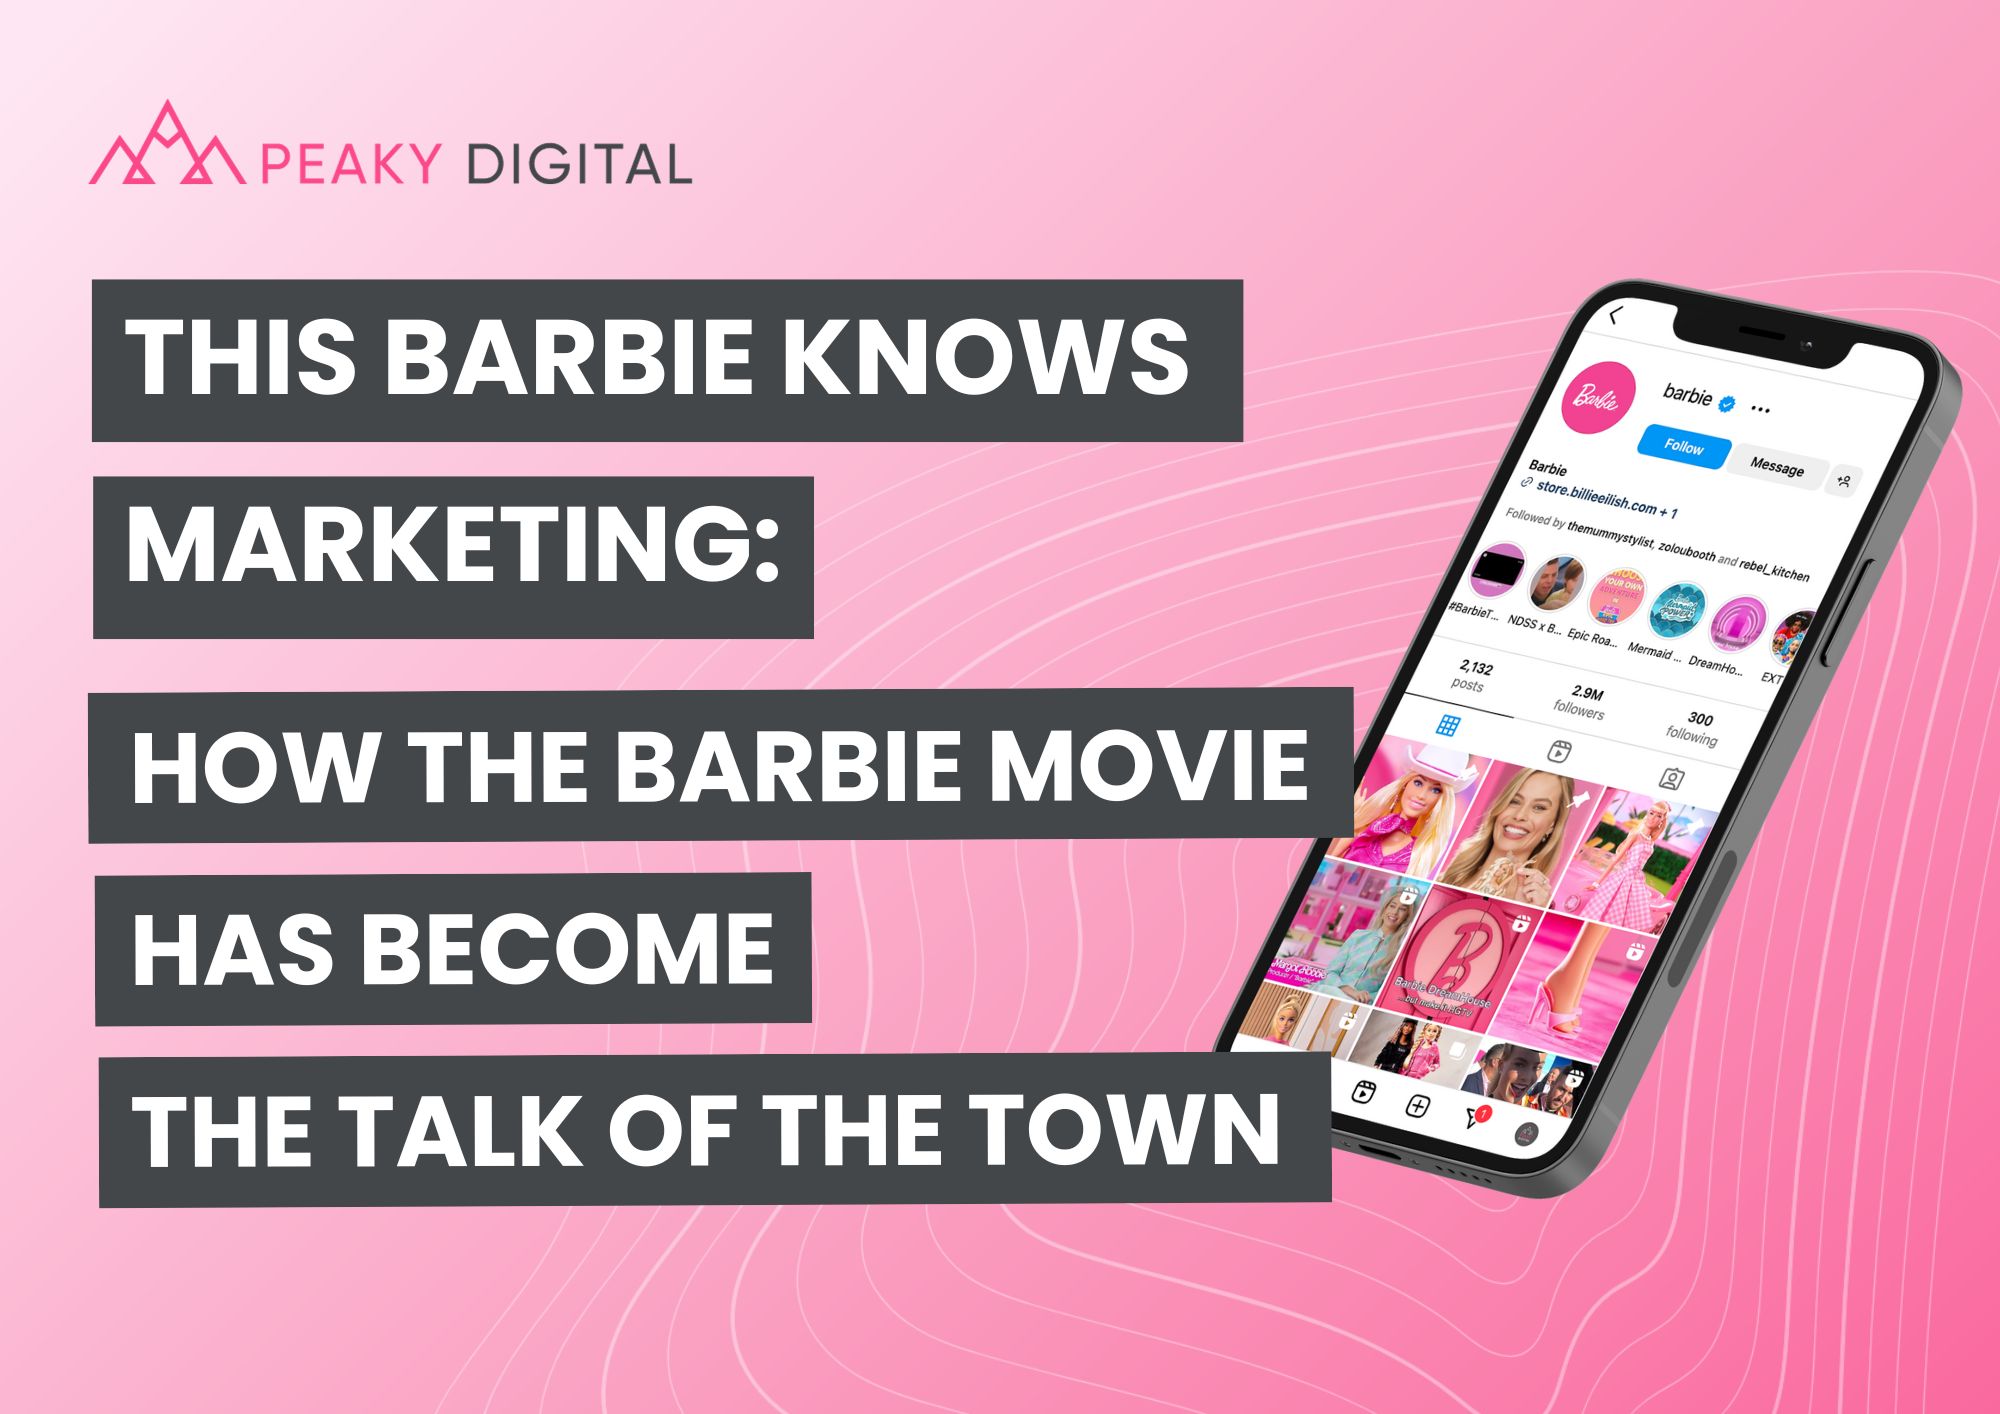 This Barbie knows knows marketing how the barbie movie has become the talk of the town